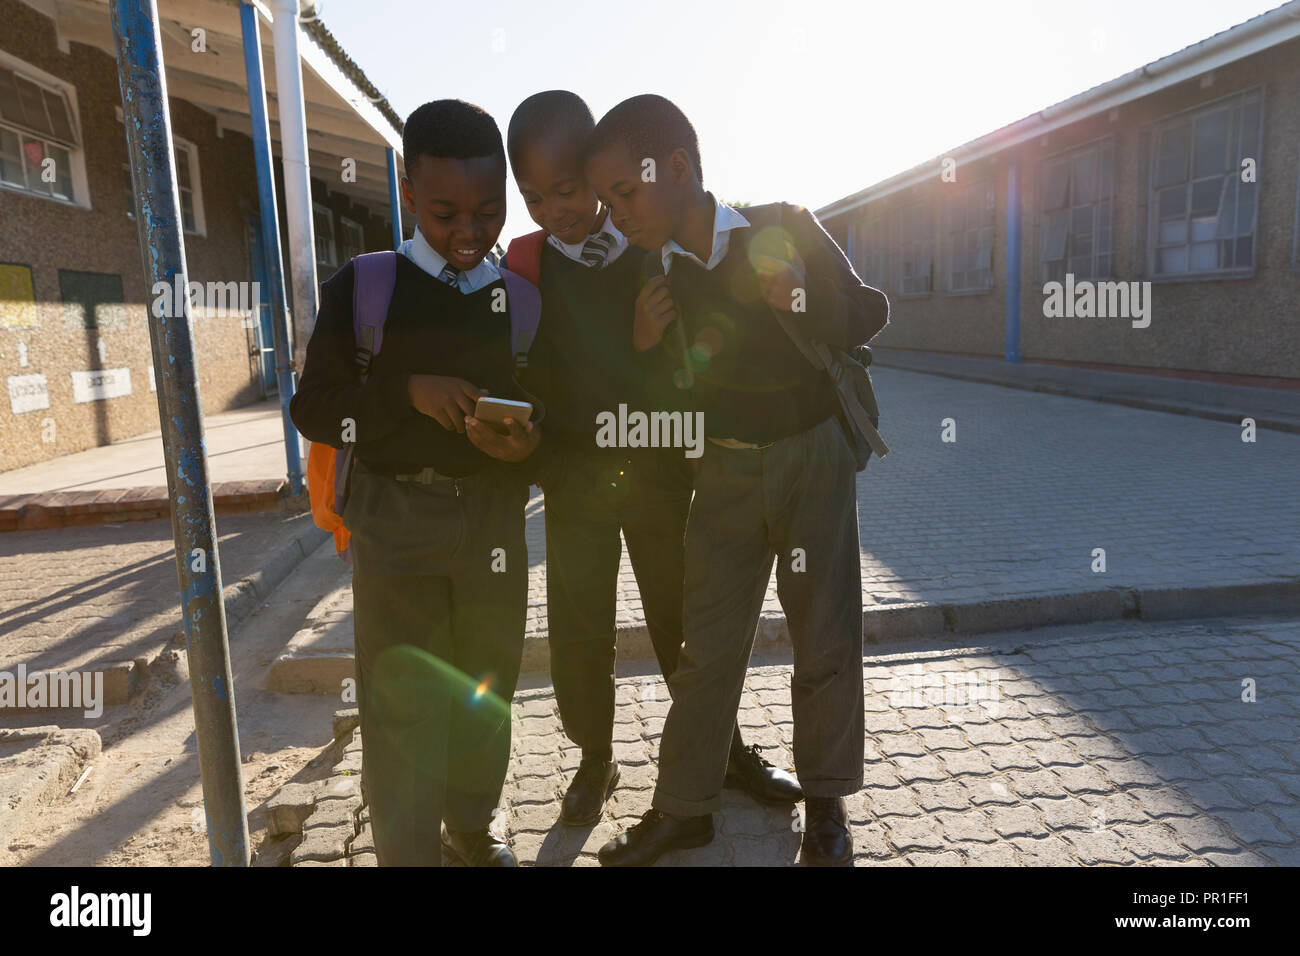 Schoolkids using mobile phone in school campus Stock Photo